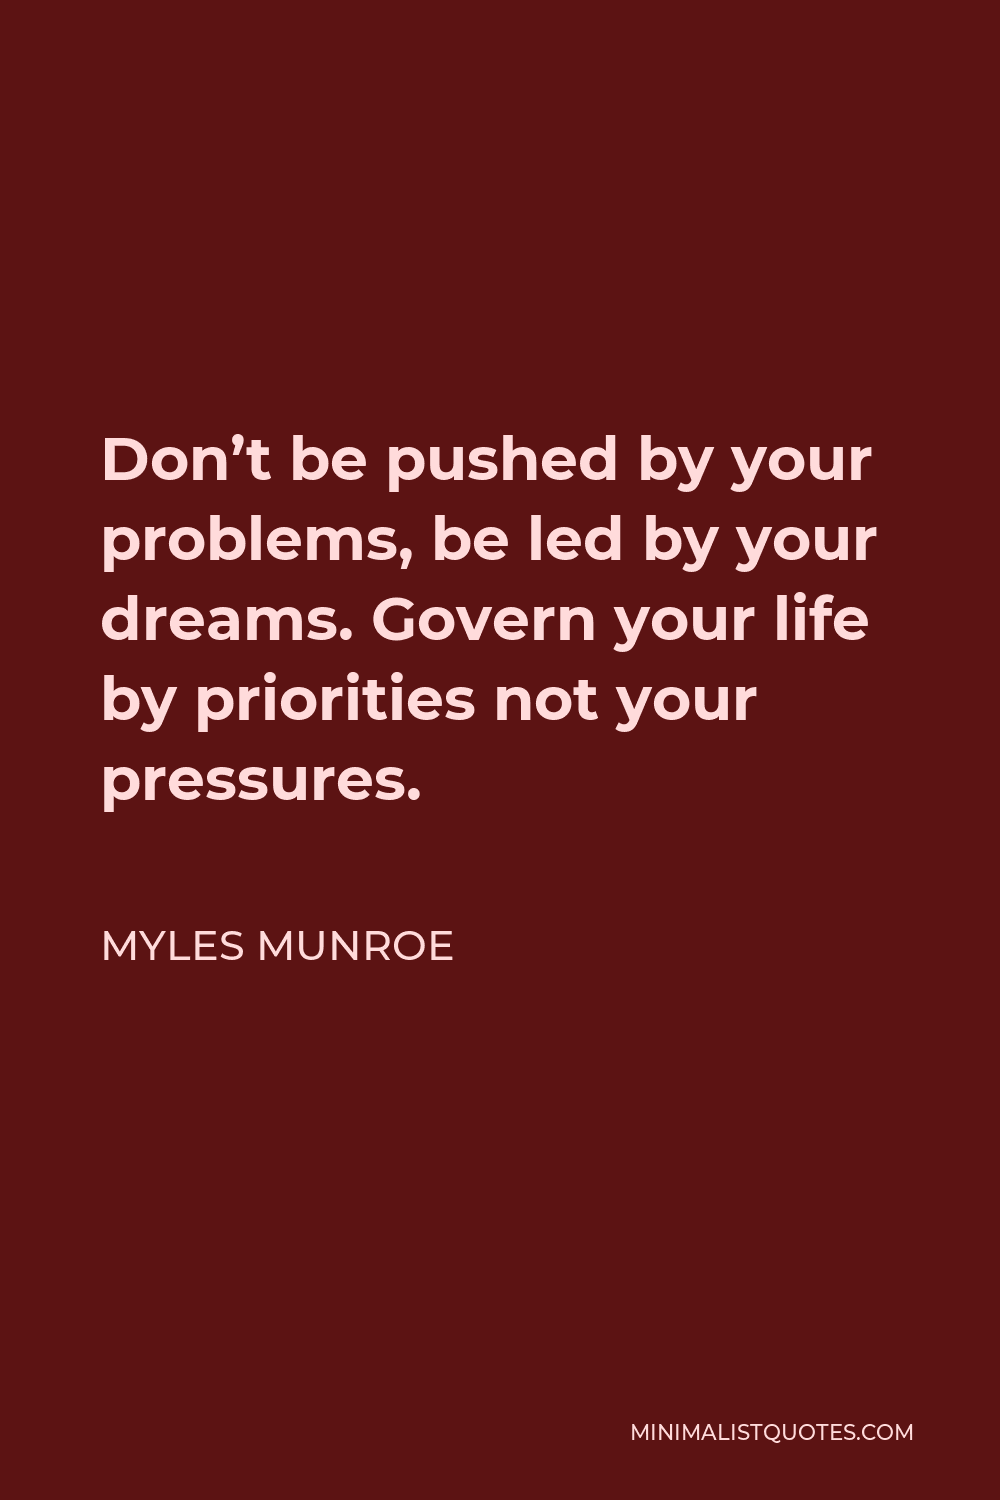 Myles Munroe Quote - Don’t be pushed by your problems, be led by your dreams. Govern your life by priorities not your pressures.